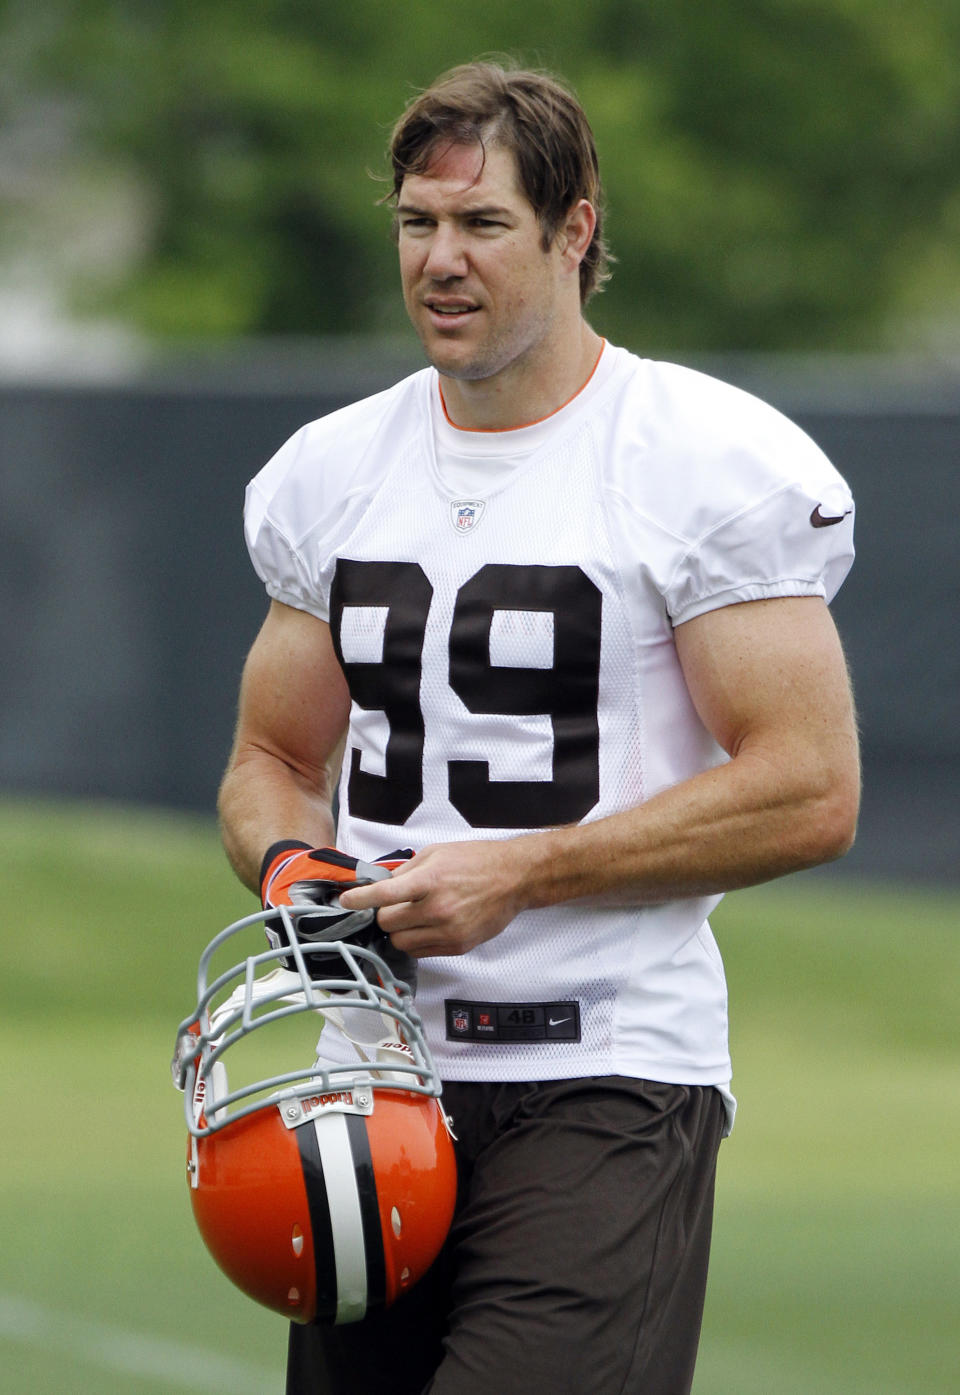 Cleveland Browns player Scott Fujita first voiced his support for gay marriage in 2009, reacting and <a href="http://outsports.com/jocktalkblog/2009/10/01/new-orleans-saint-scott-fujita-supports-marriage/">agreeing with fellow NFL colleague Brendon Ayanbadejo</a>. Two years later, Fujita continued his LGBT advocacy, <a href="http://www.hrc.org/blog/entry/scott-fujita-joins-hrcs-americans-for-marriage-equality">taping a PSA</a> for the HRC’s Americans for Marriage Equality initiative. 